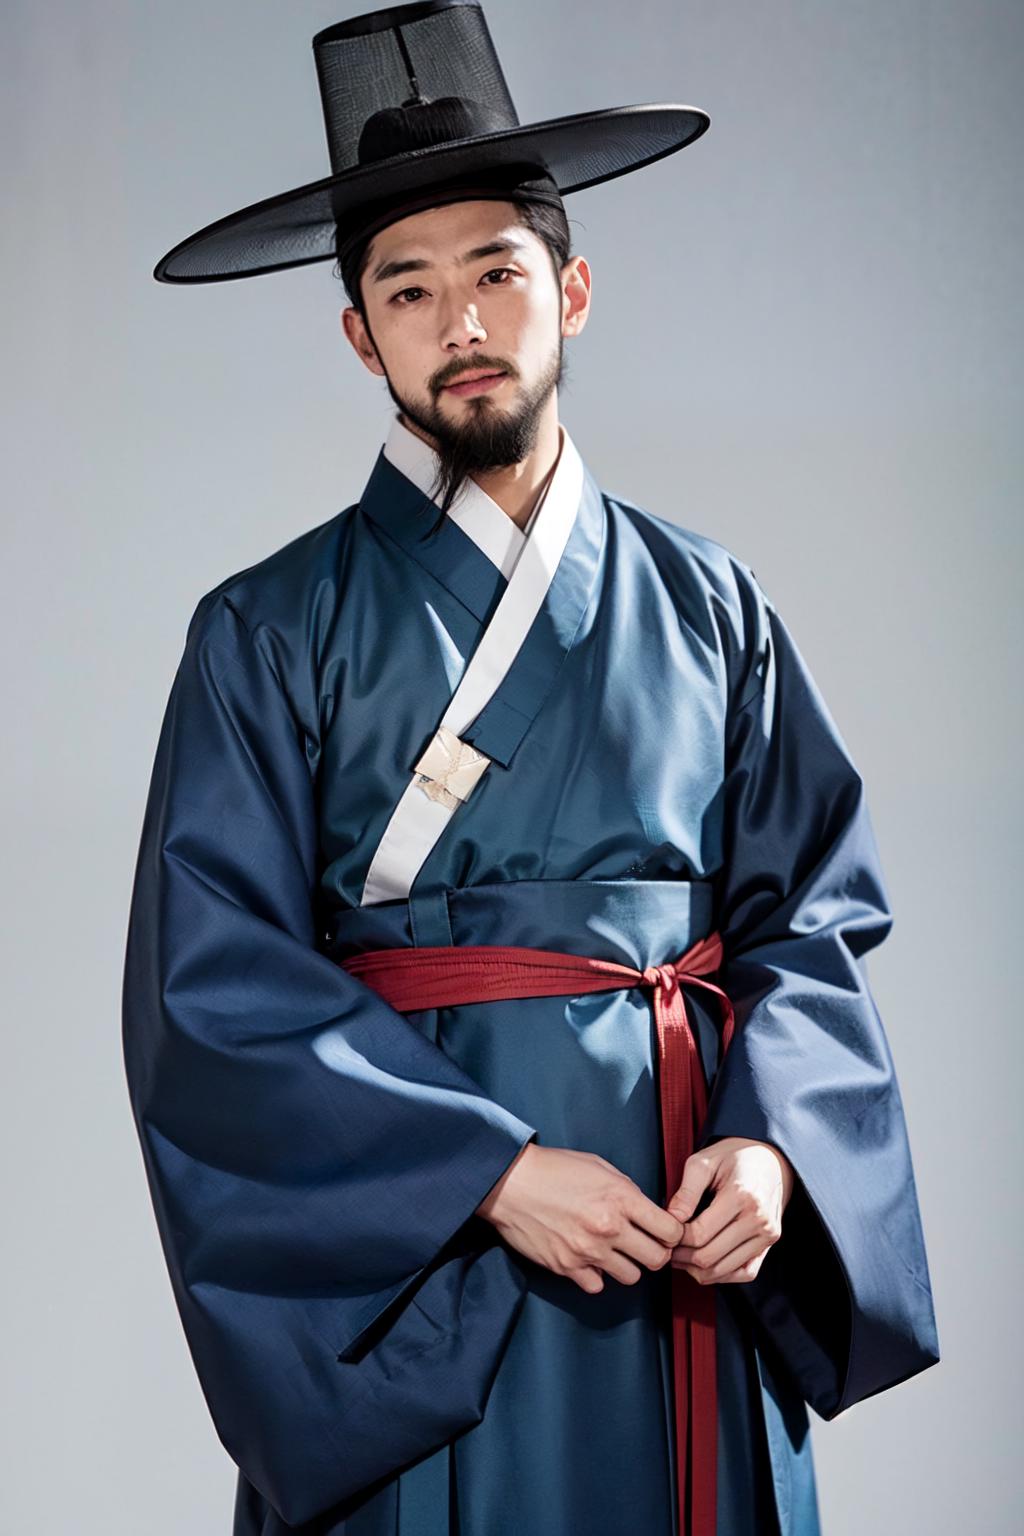 Male Noble Class Hanbok - Korea Clothes image by chals